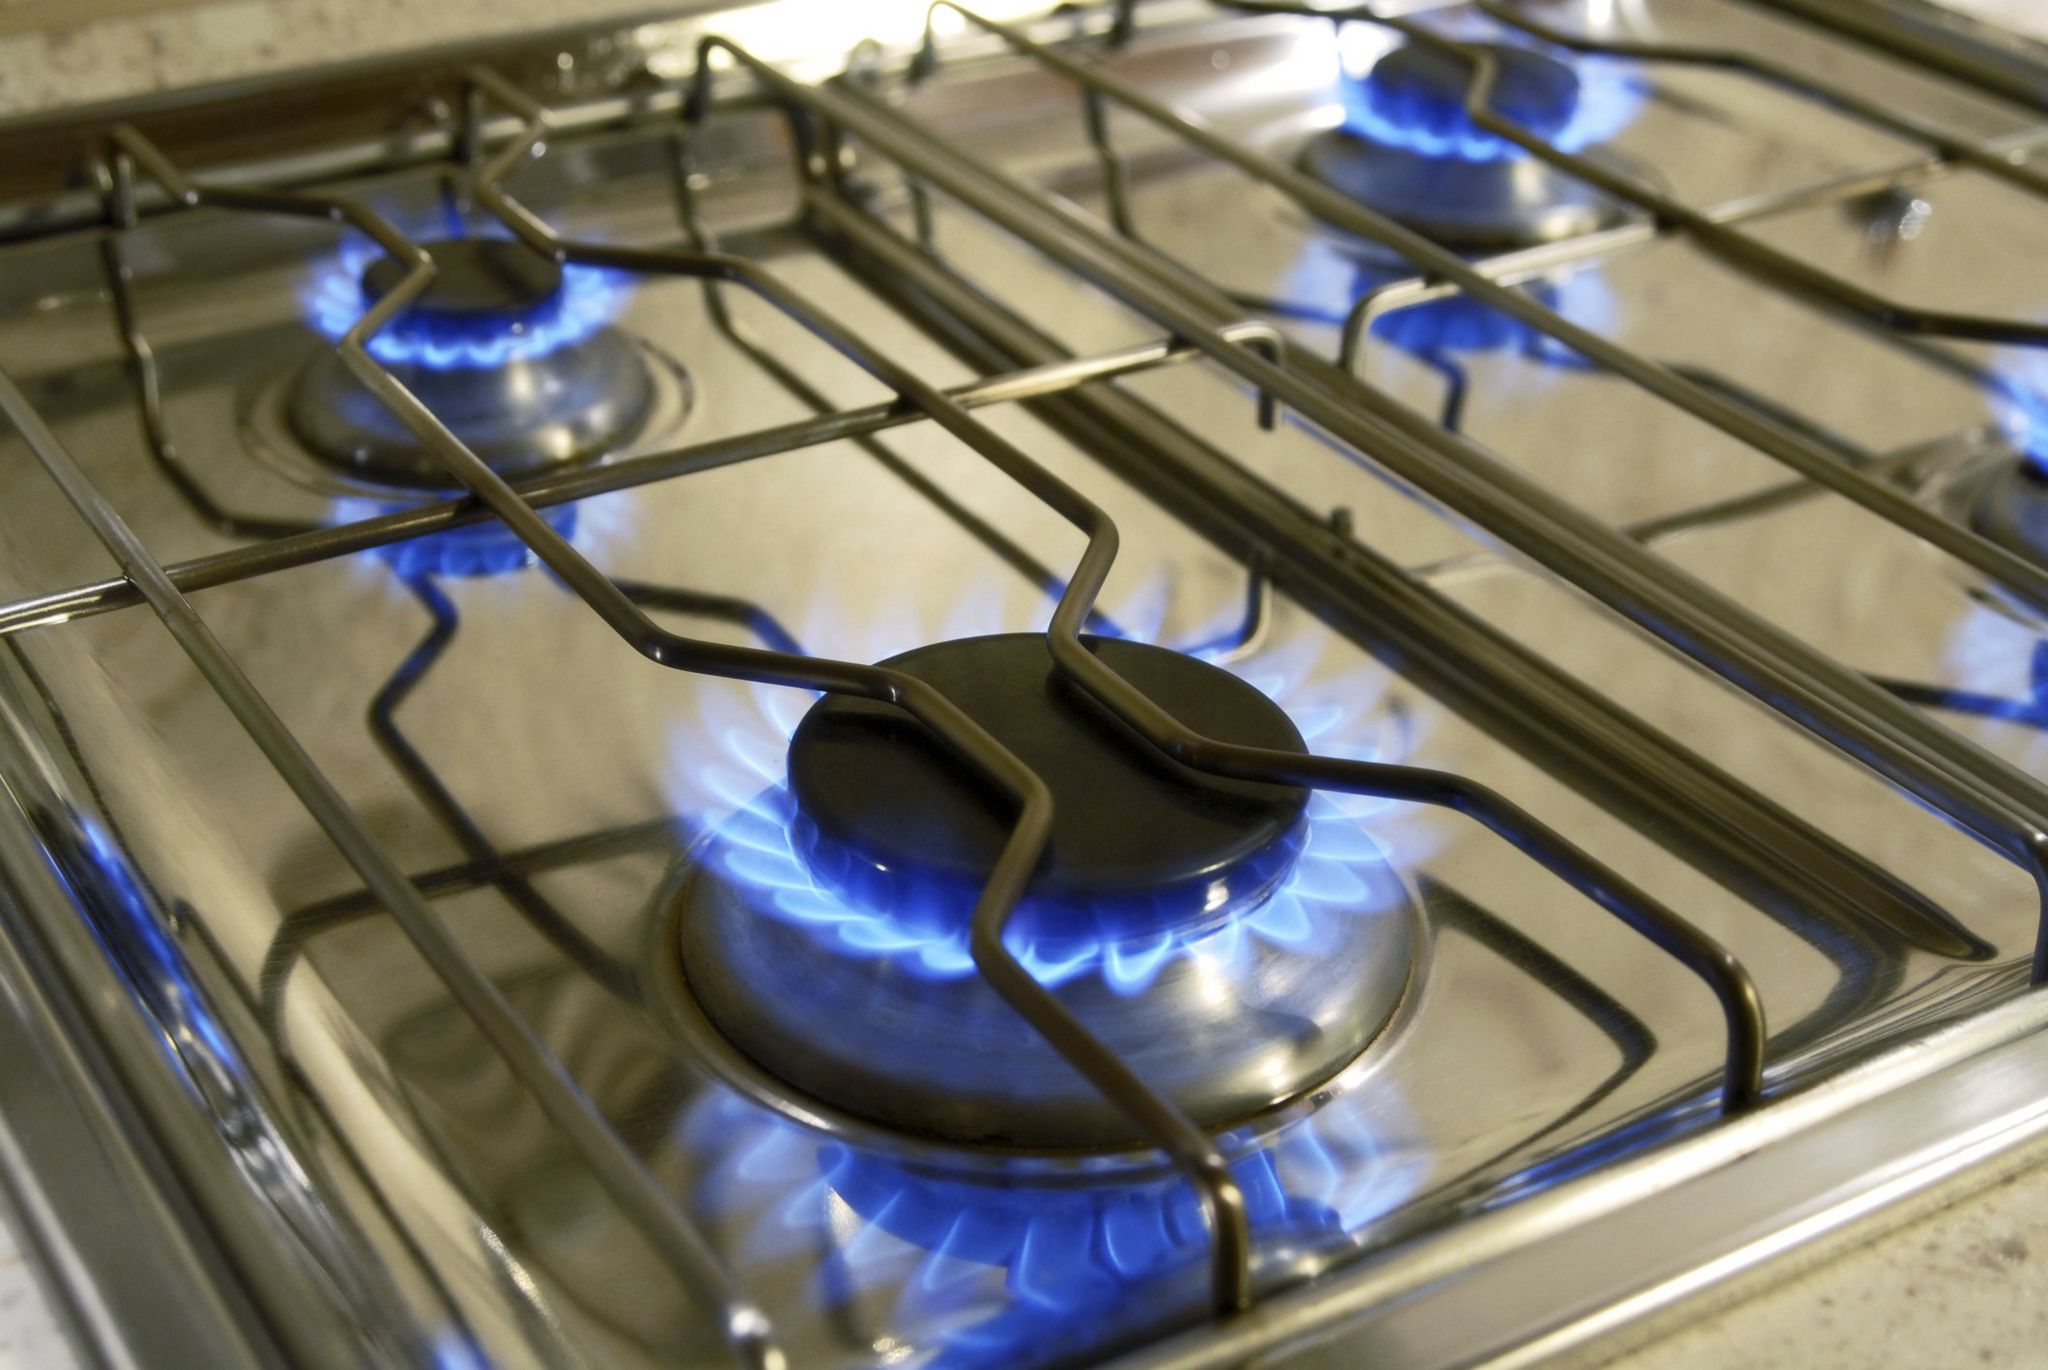 How To Disconnect A Gas Stove Uk All information about